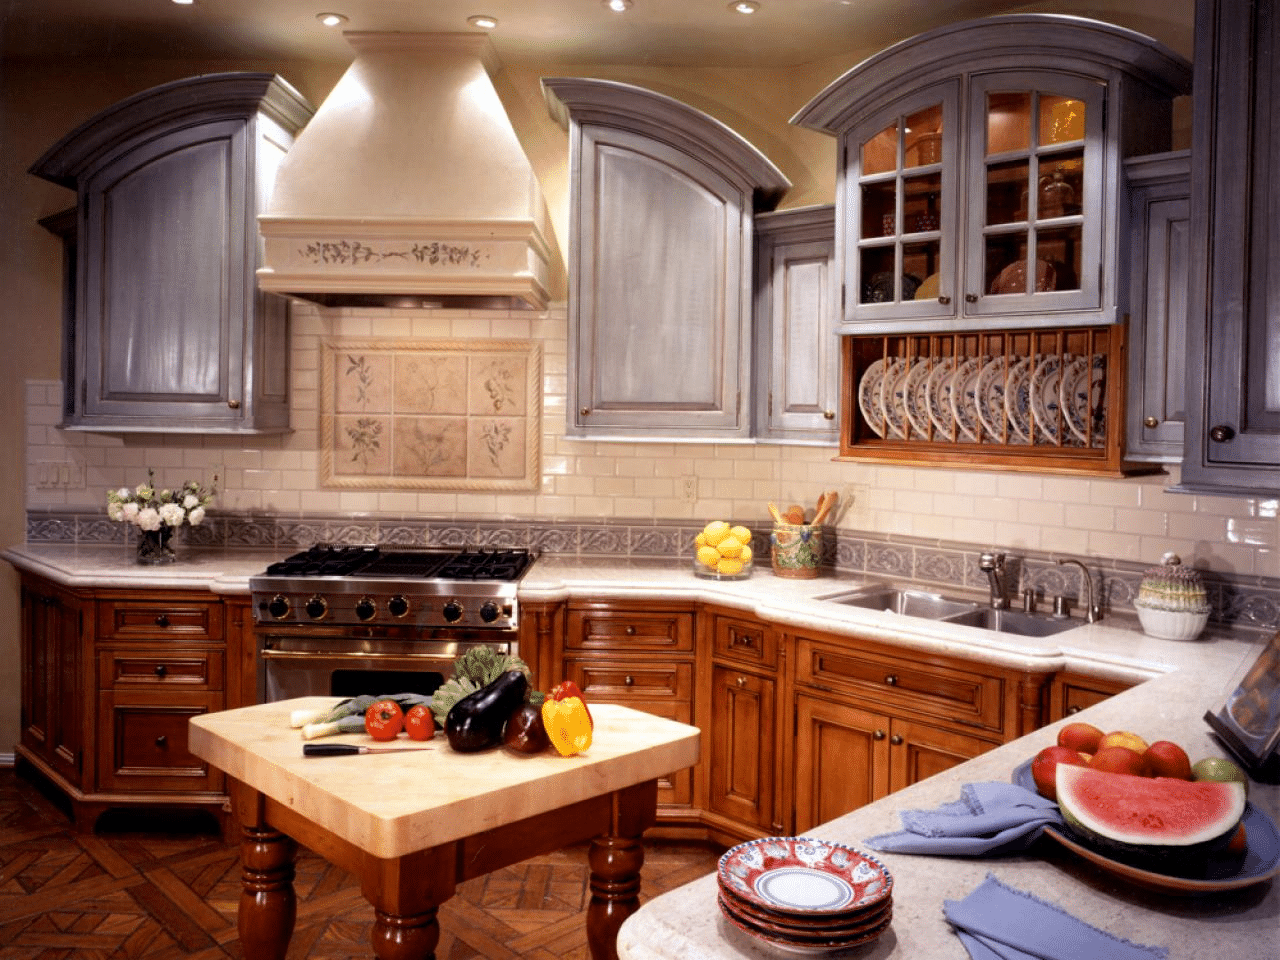 European Kitchen design with custom cabinetry